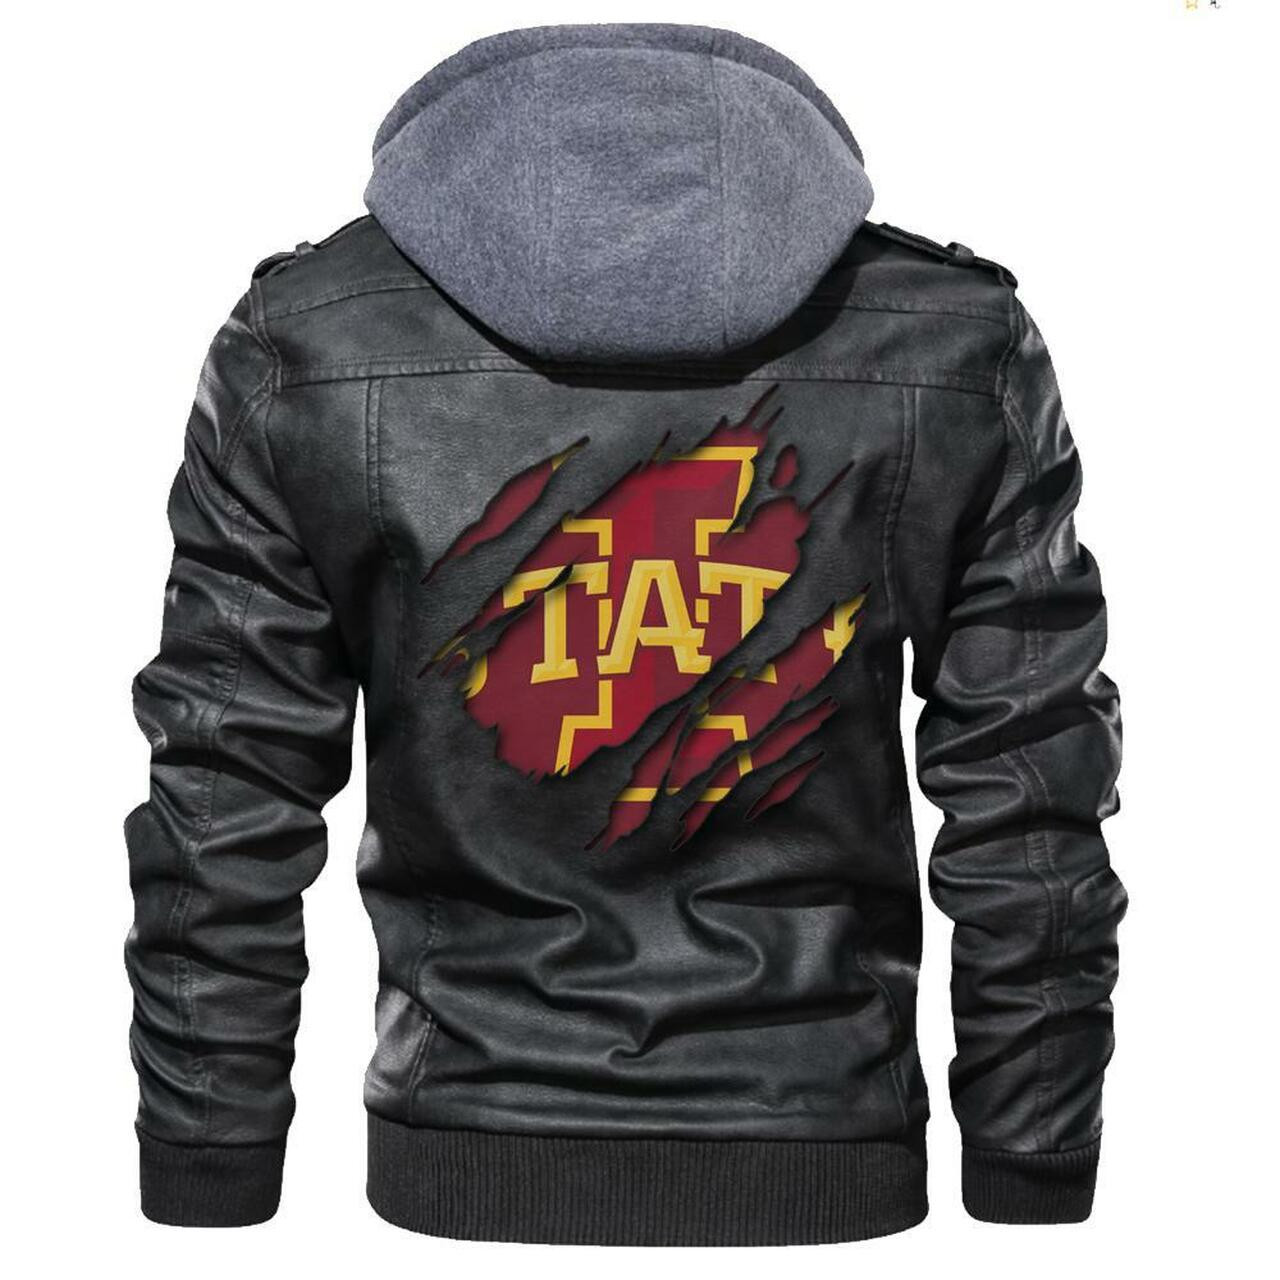 Are you looking for a great leather jacket? 162